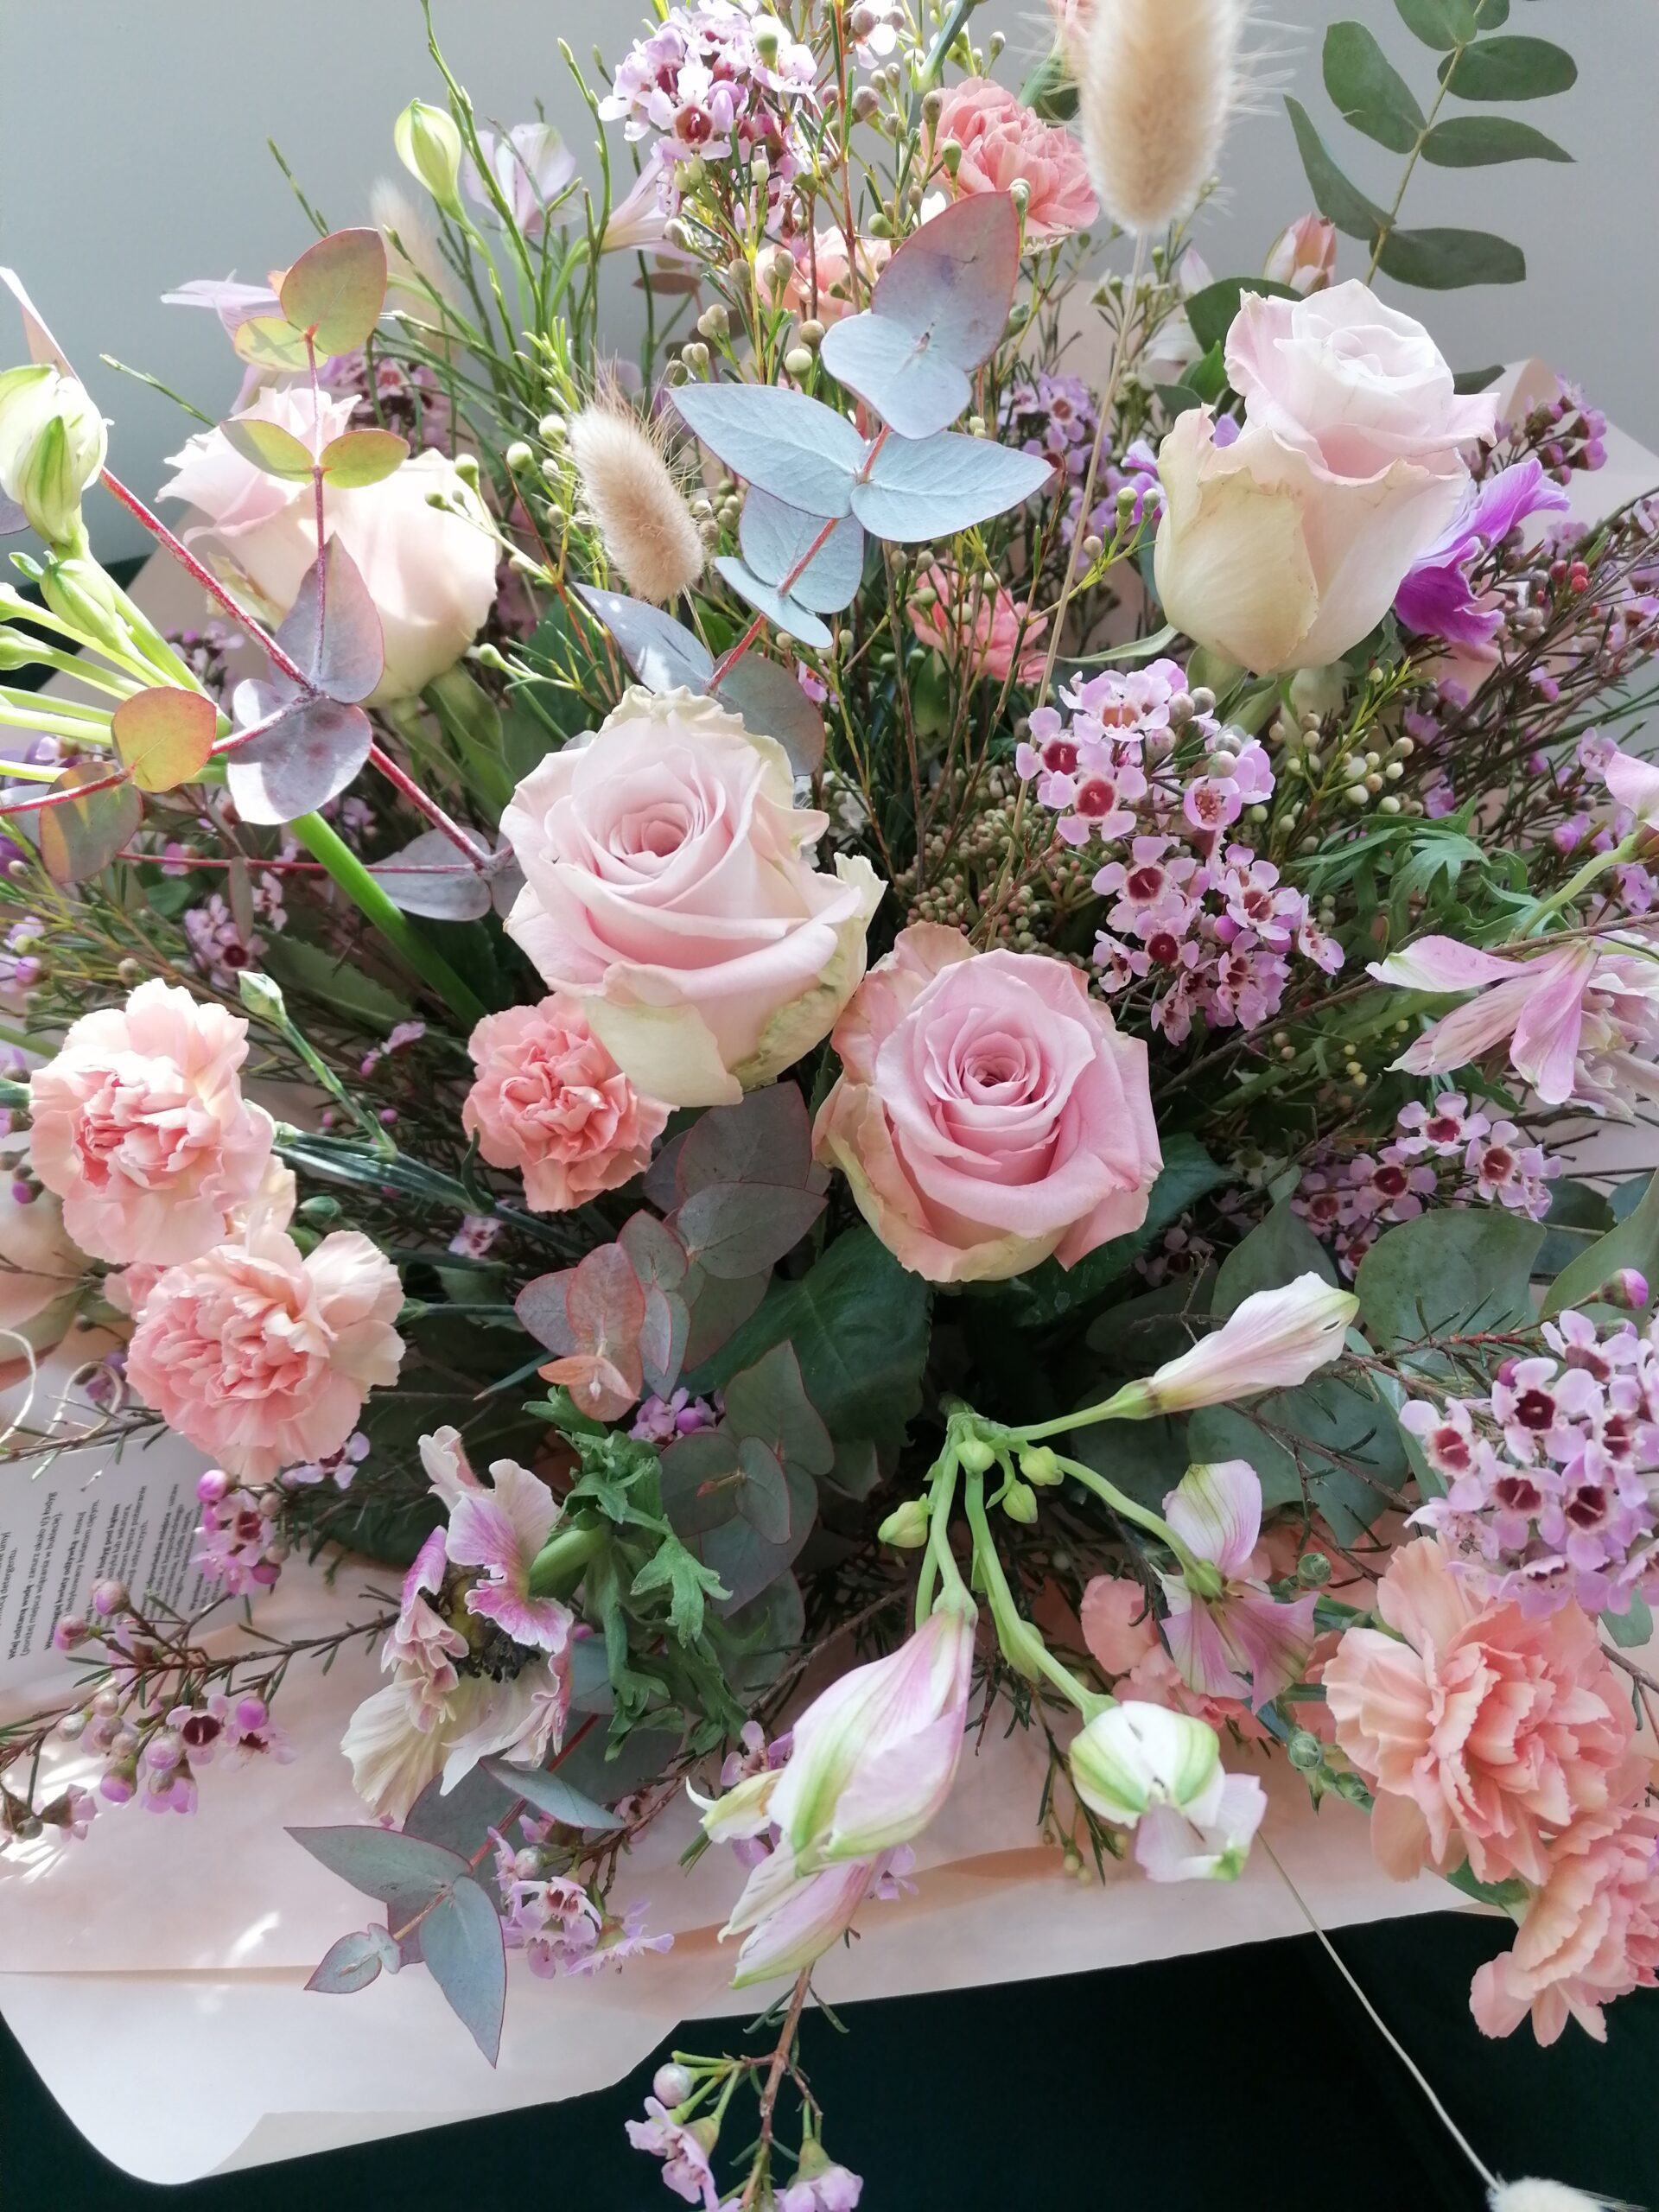 This is a unique, subtle, feminine way to give the gift of a special bouquet. Starring roses, alstroemeria, carnations, wax and eucalyptus. This bouquet brings a blush of